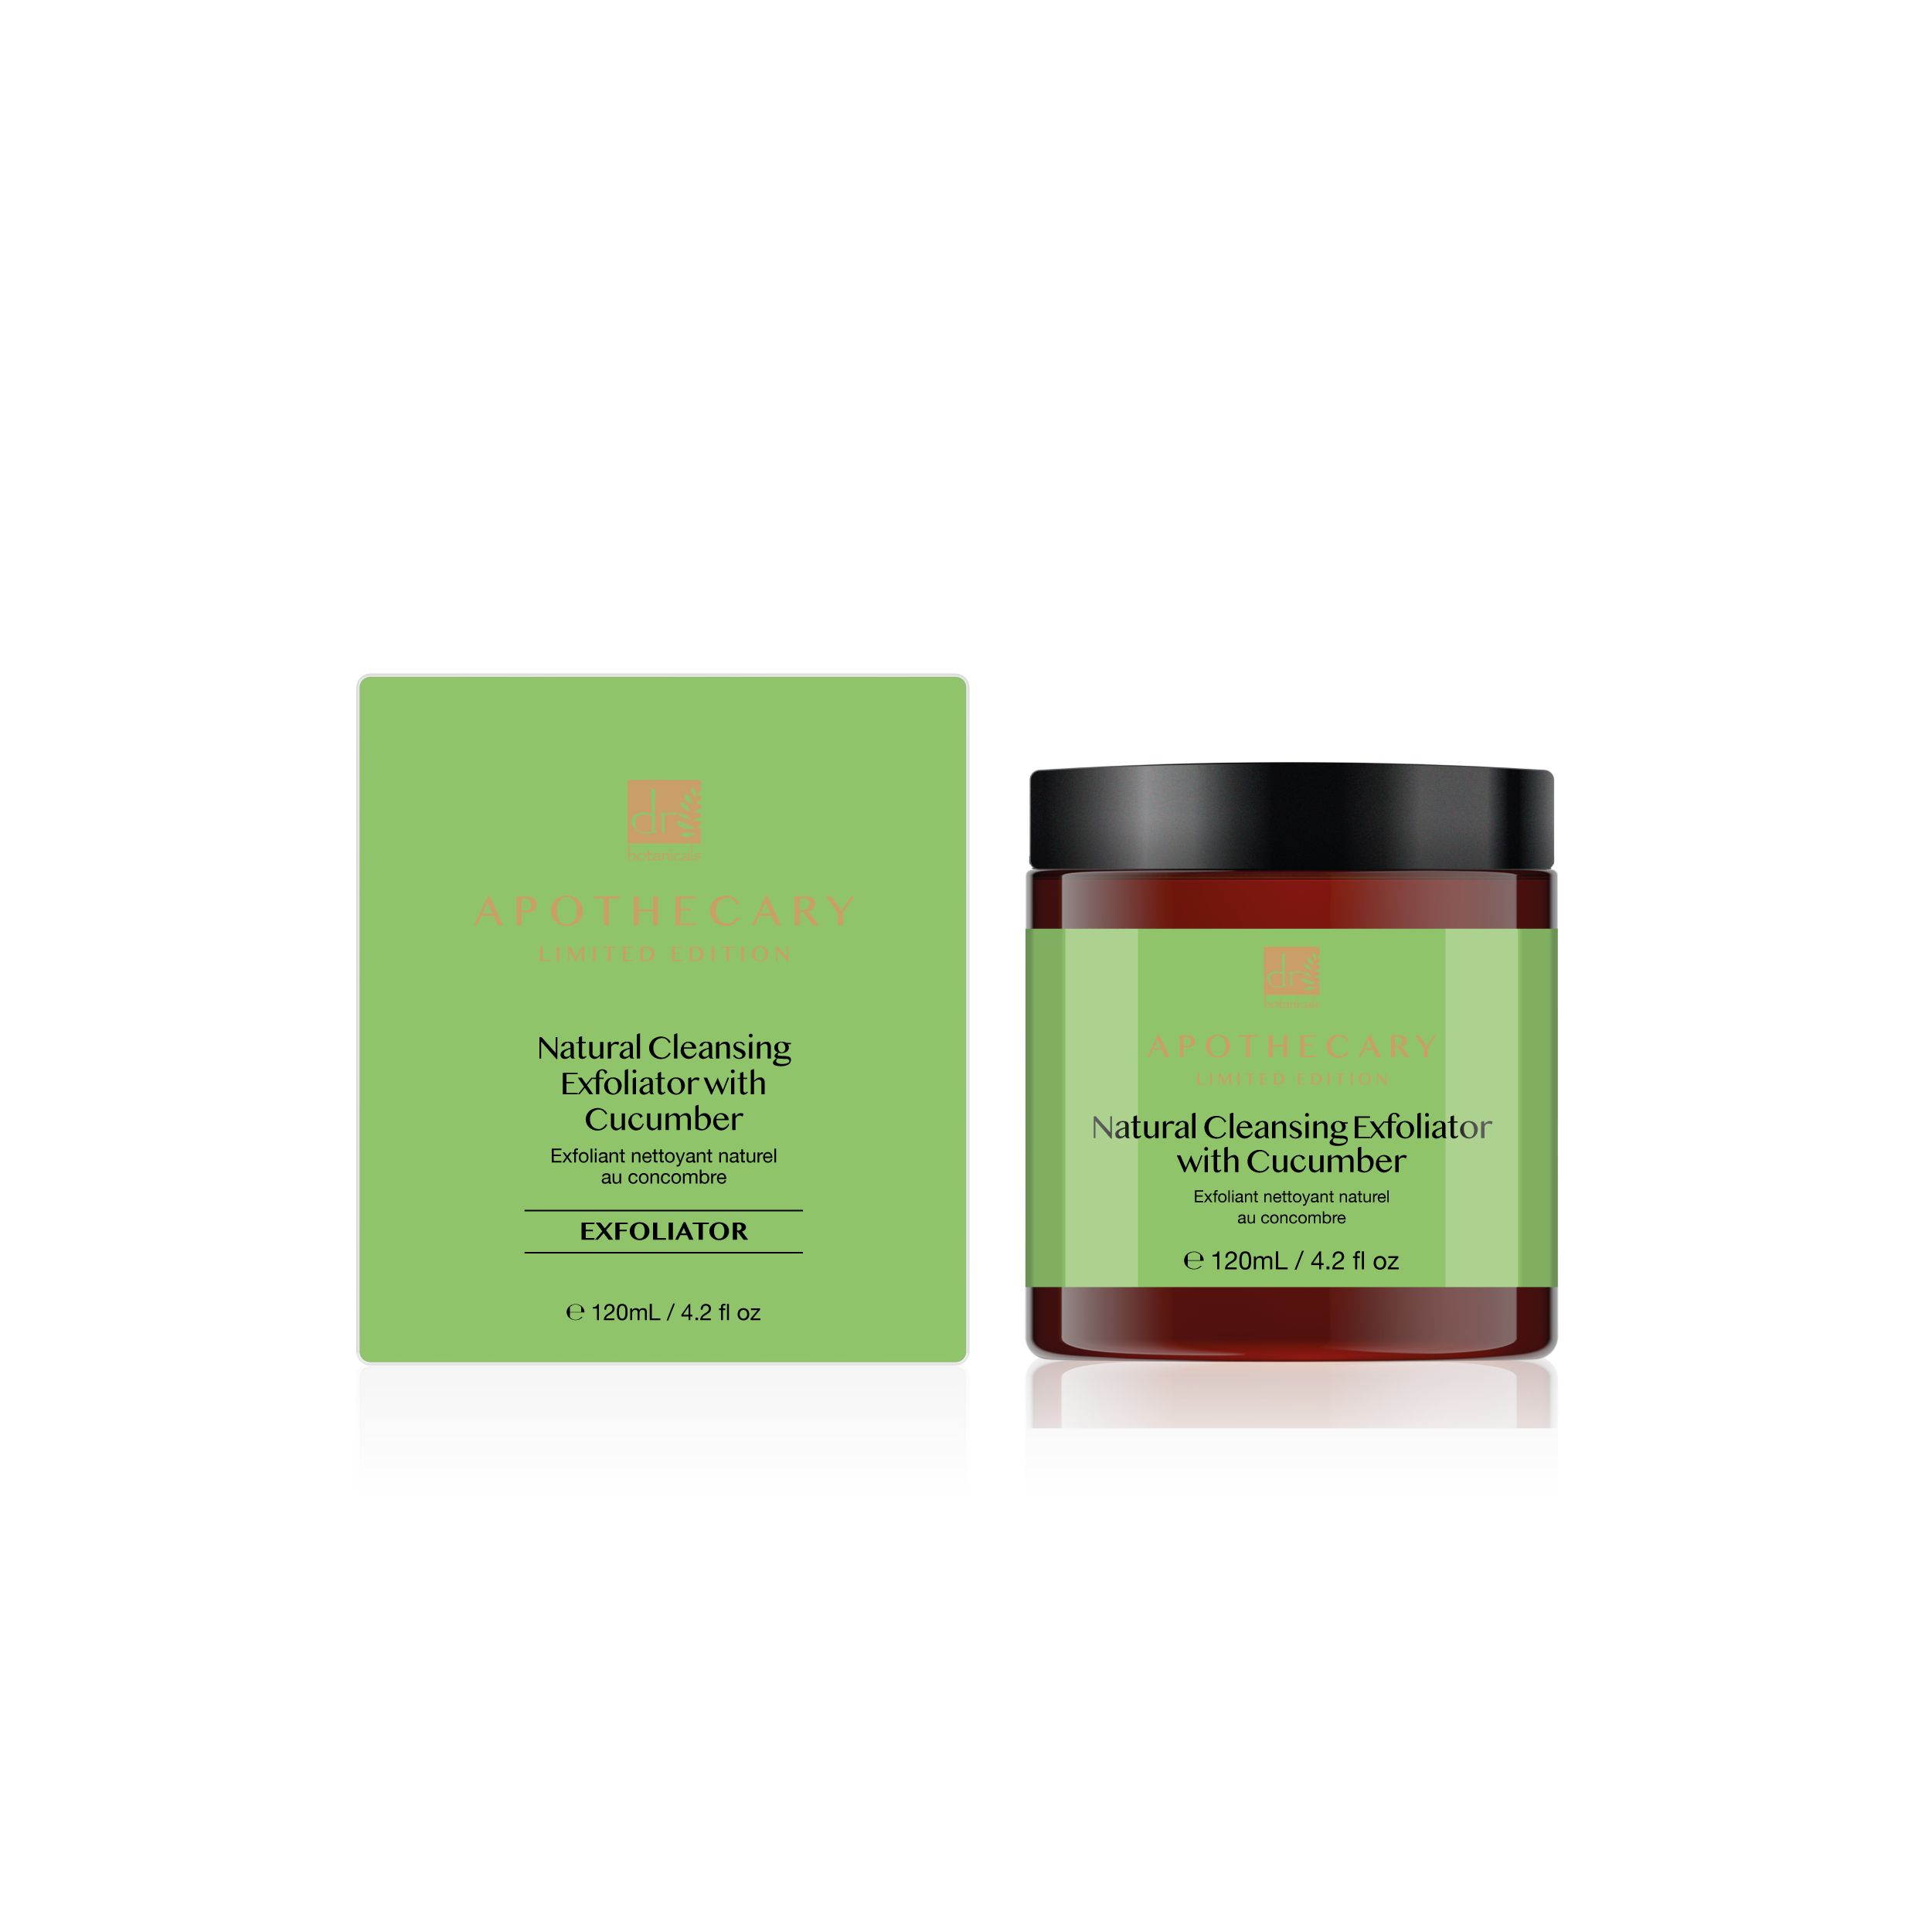 Dr Botanicals Natural Cleansing Exfoliator with Cucumber